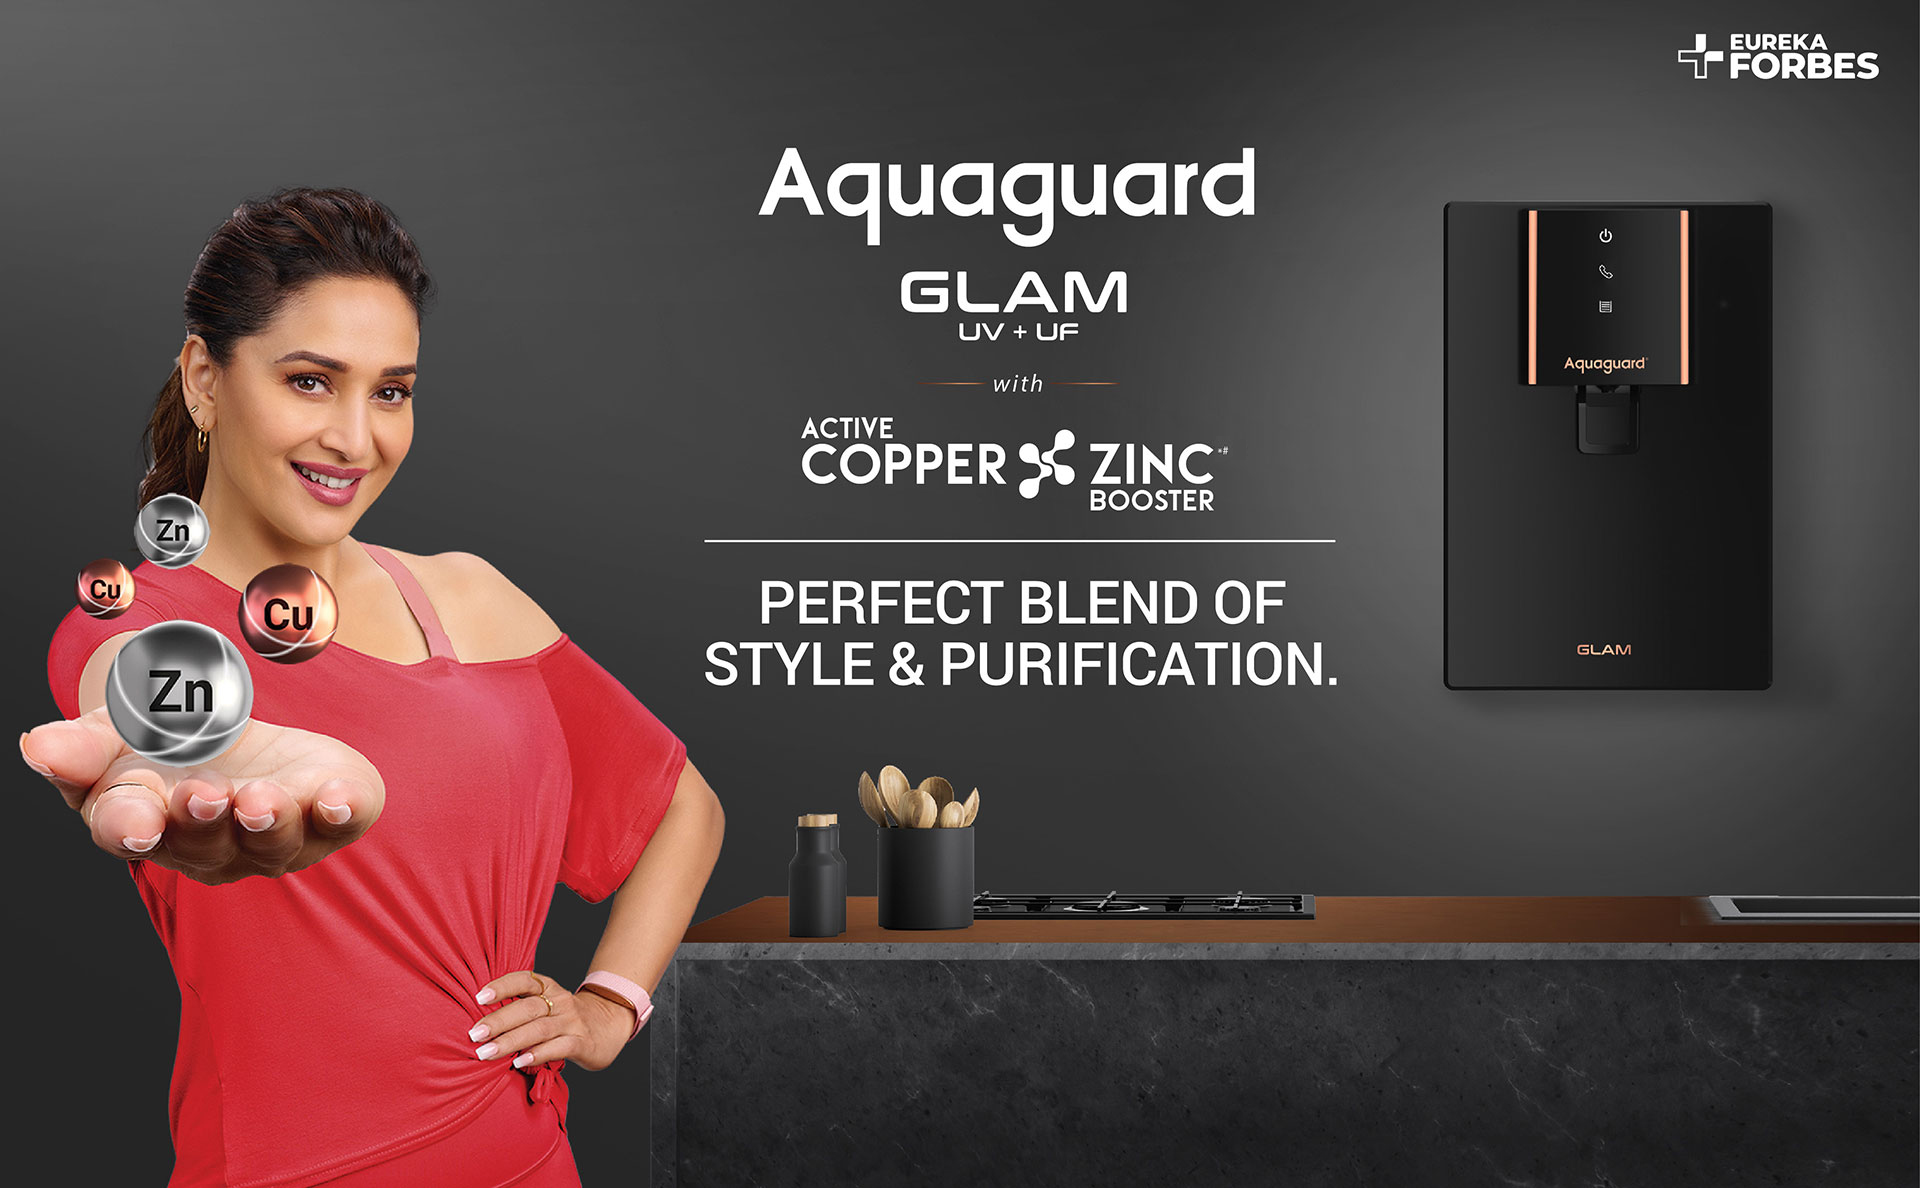 Aquaguard GLAM UV + UF with Active Copper PERFECT BLEND OF STYLE & PURIFICATION.